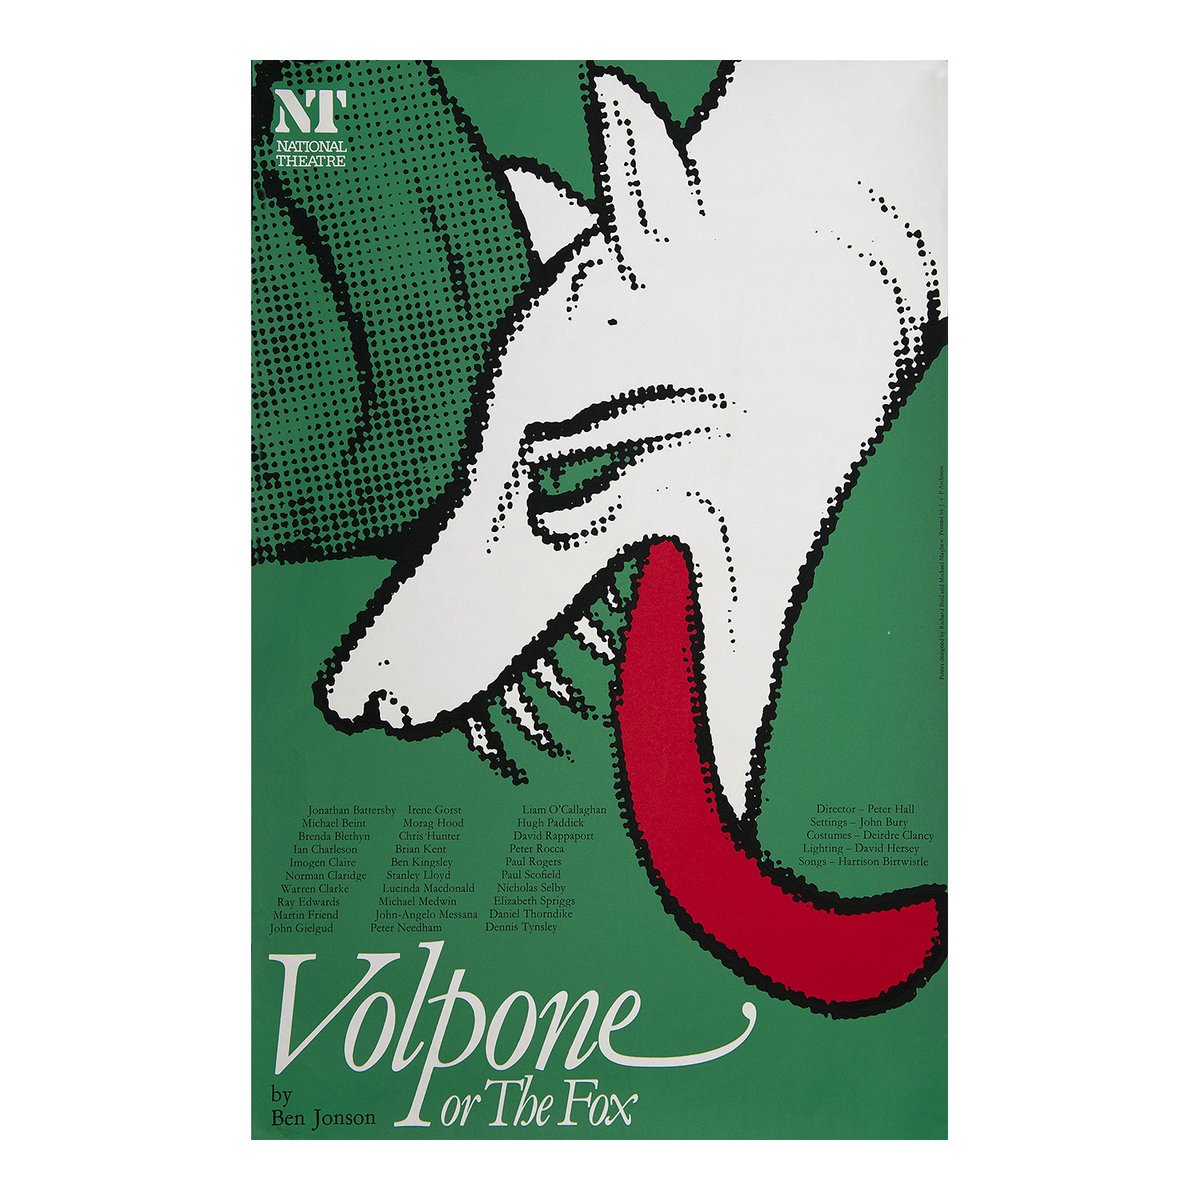 National Theatre poster for the Ben Johnson comedy Volpone or The Fox, 1977. The design by Richard Bird and Michael Mayhew was adapted from an illuminated medieval manuscript showing a fox with sharp teeth and snaking red tongue. Dir. by Peter Hall https://t.co/M6b9E6p1n0